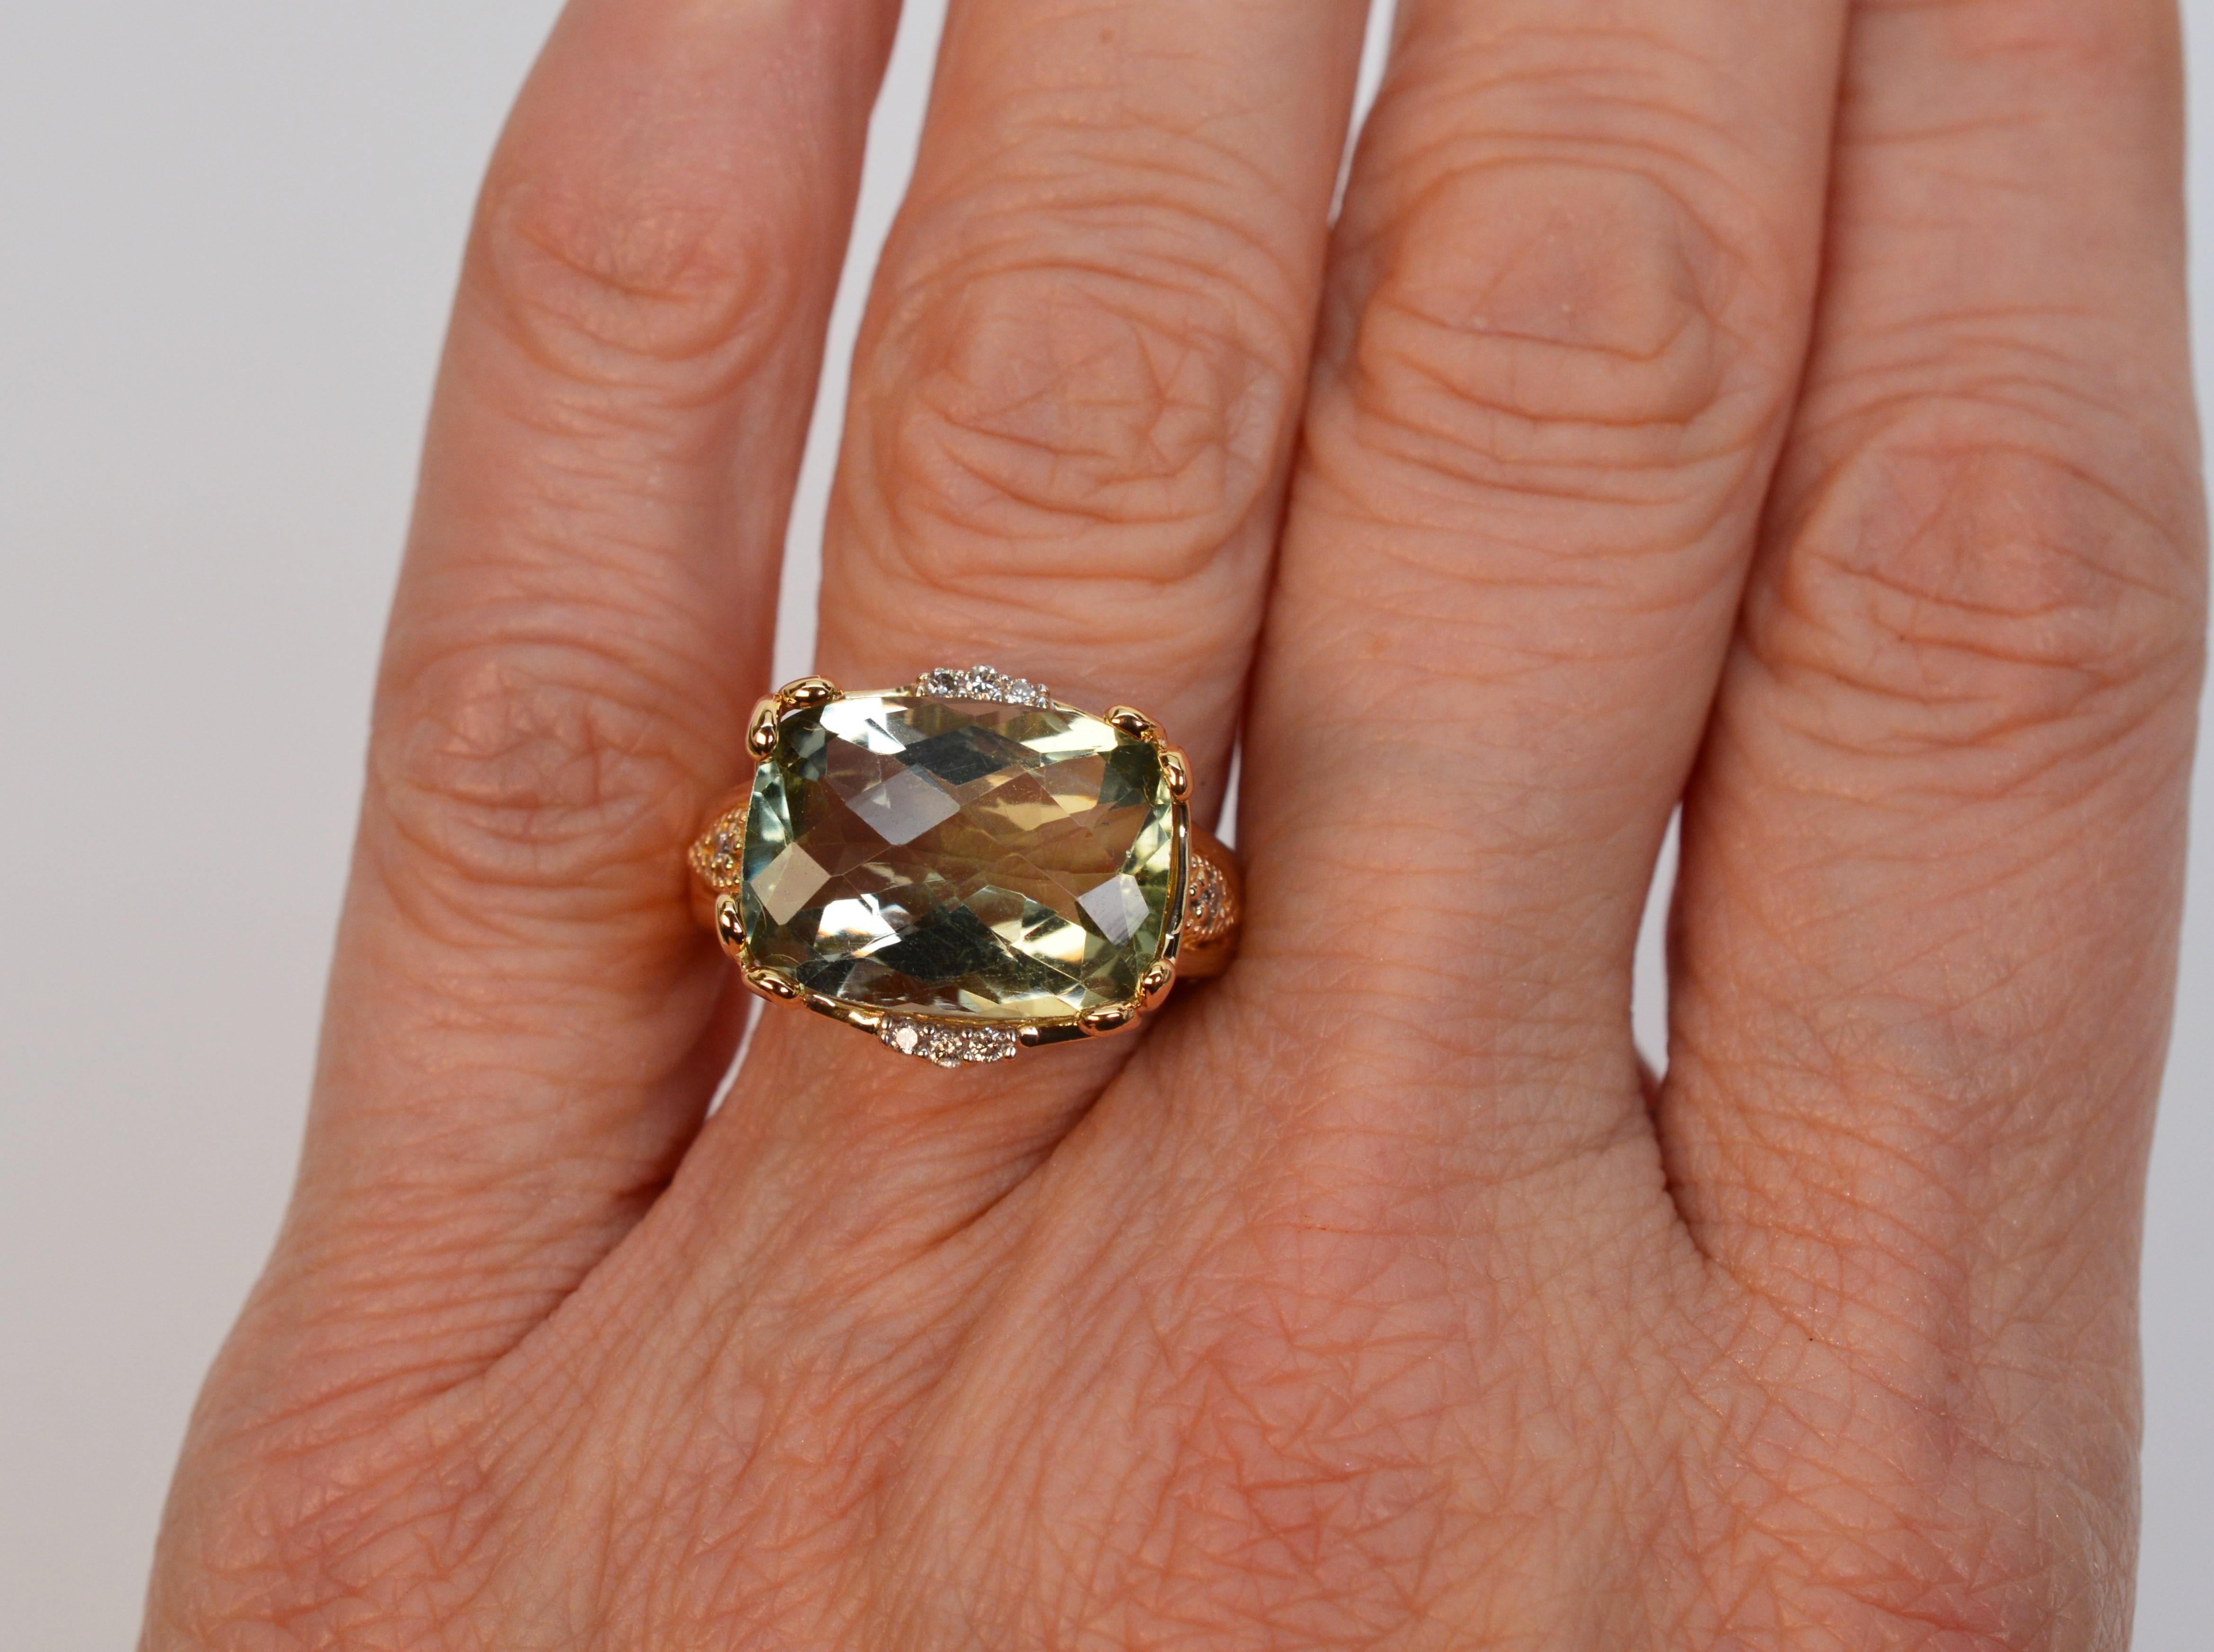 5 Carat Green Amethyst 14 Karat Cocktail Ring with Diamond Accents 3